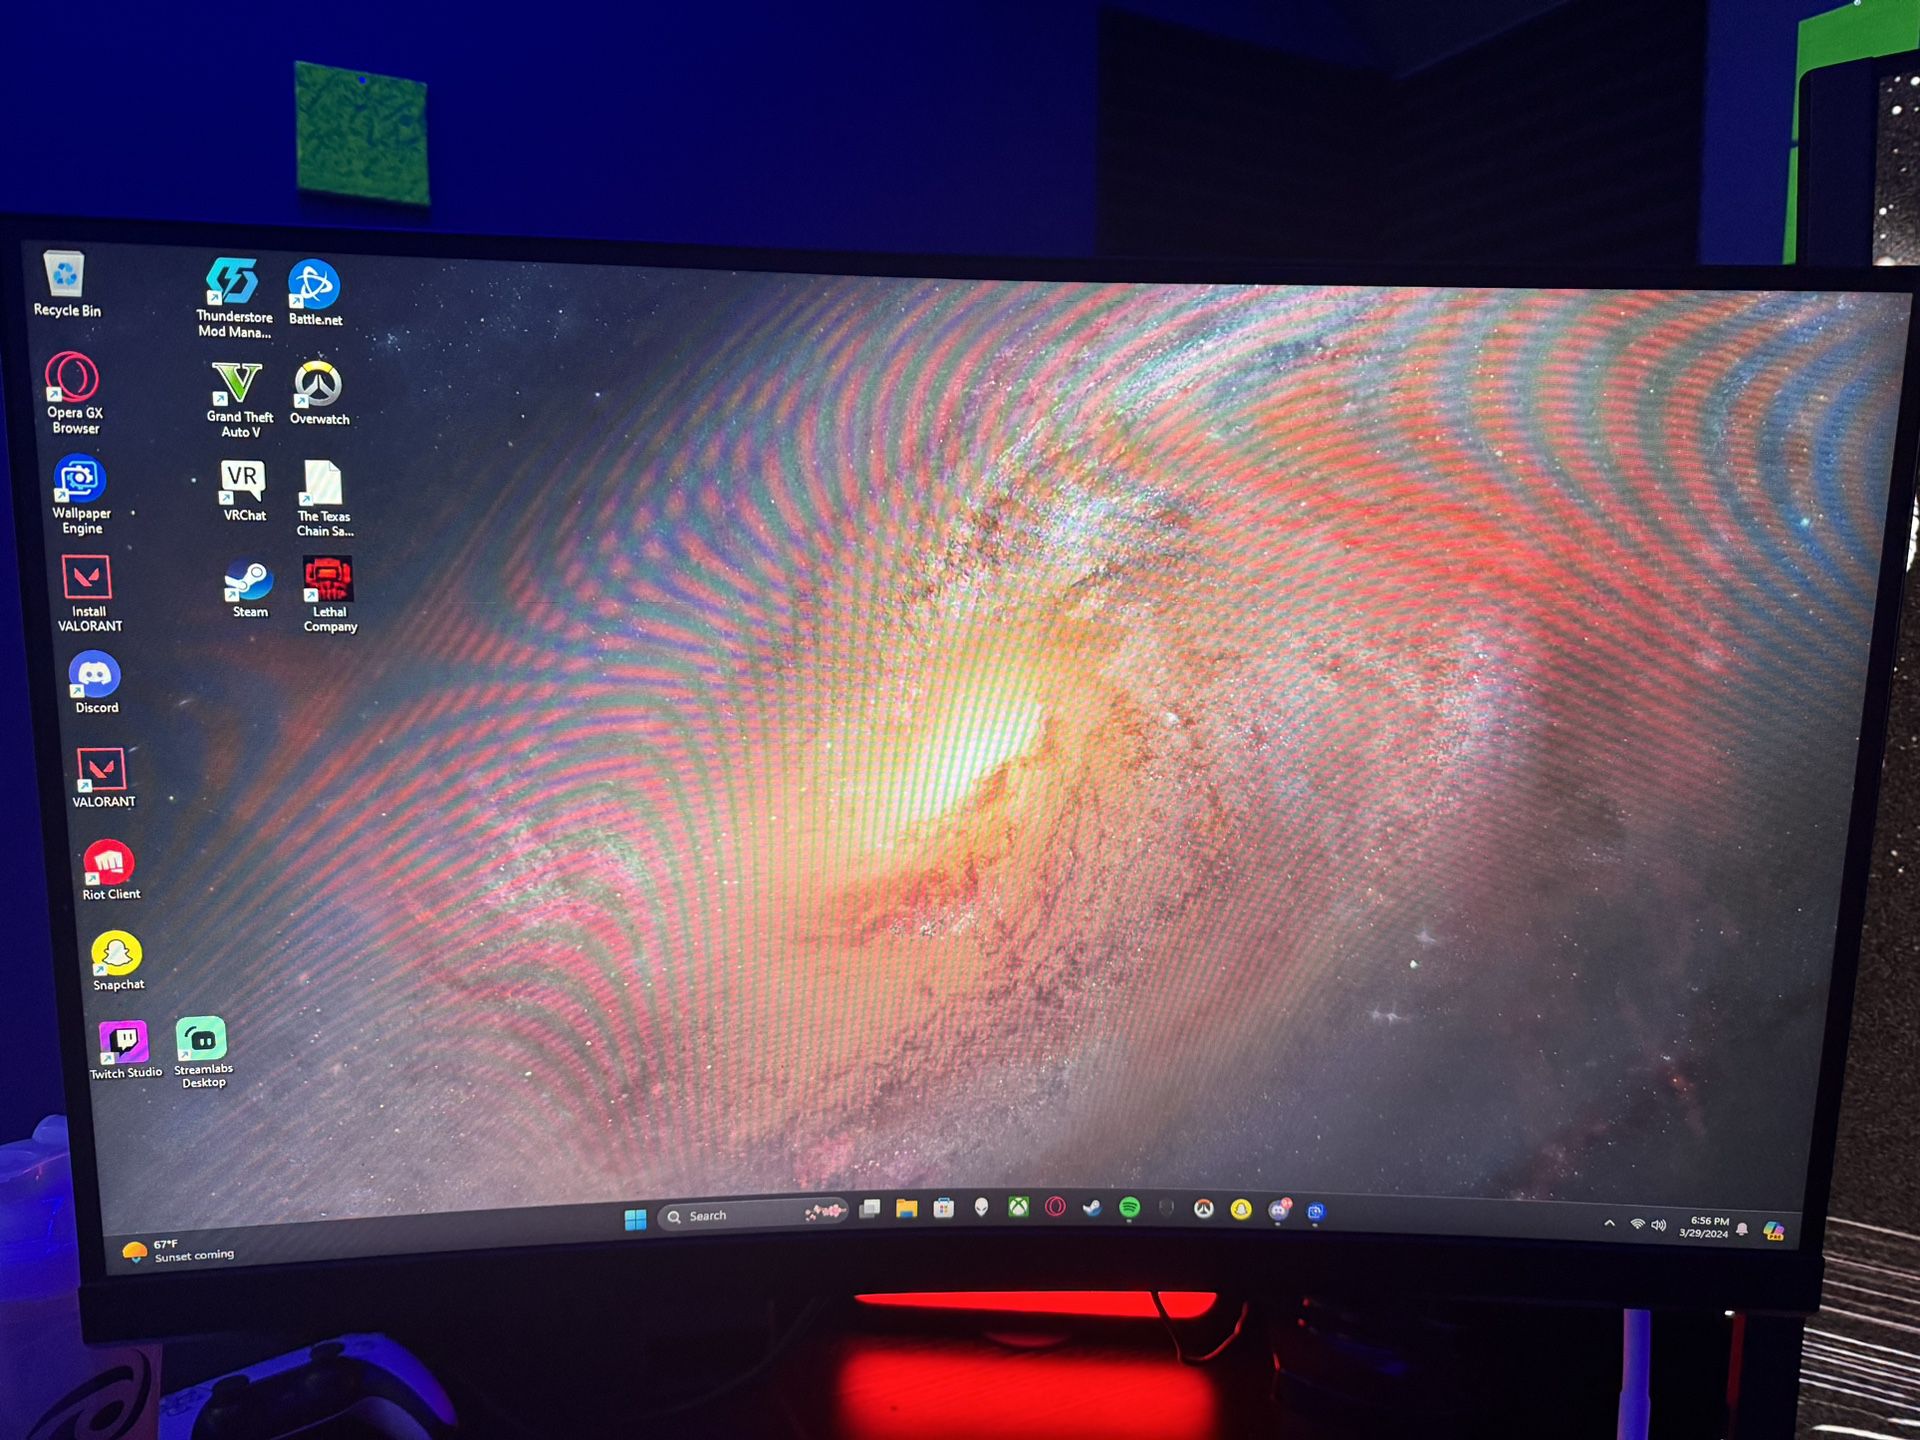 2 MSI Gaming Monitors With duel VESA Mount Please Make An Offer